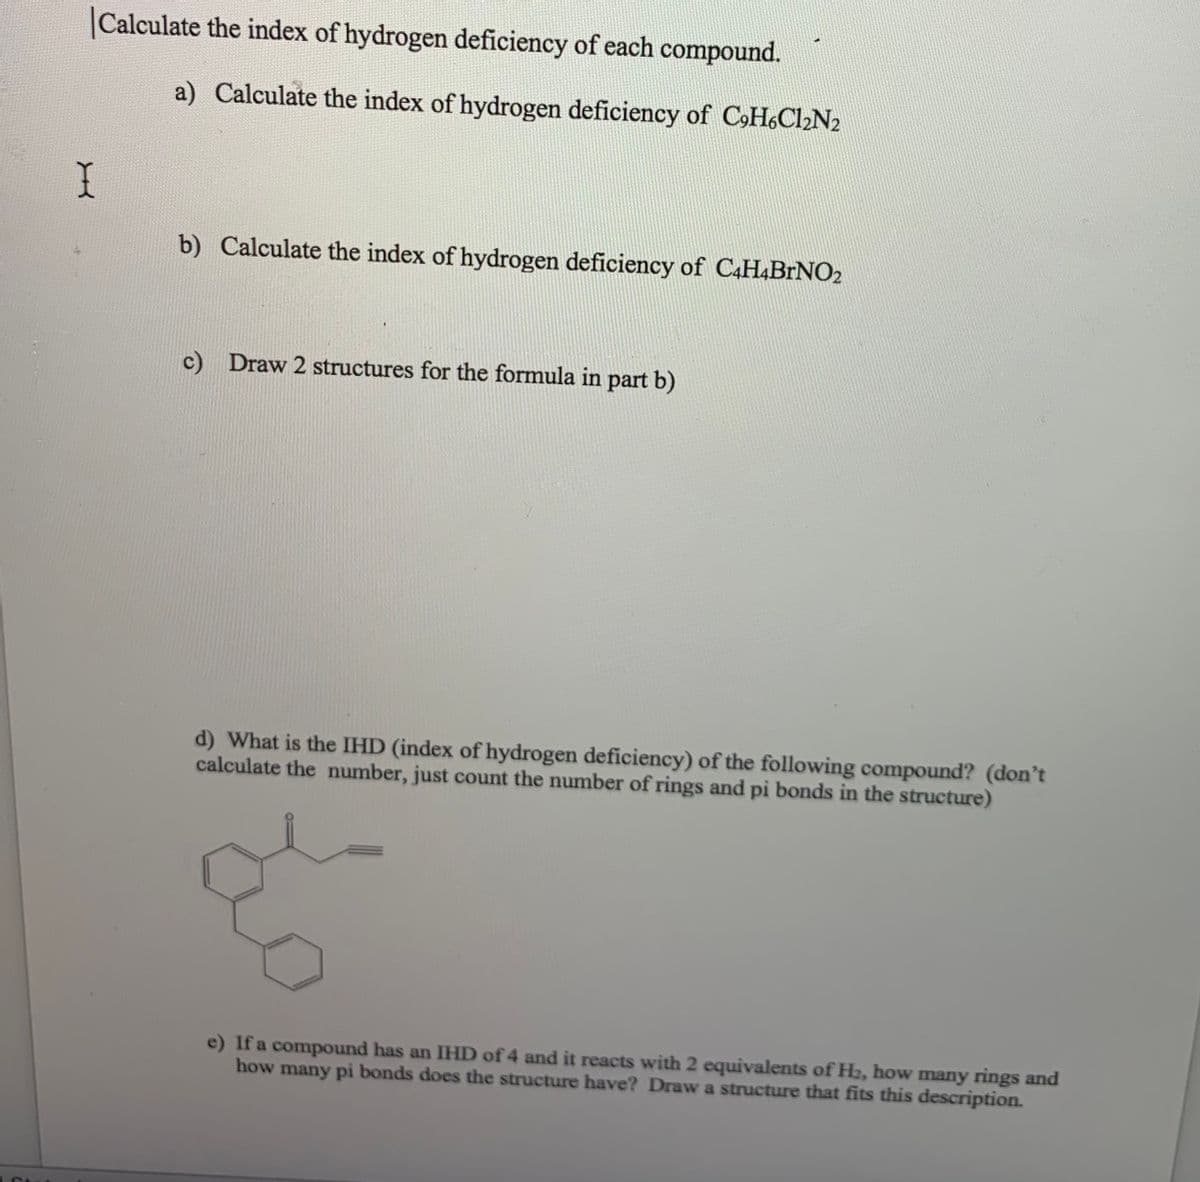 Calculate the index of hydrogen deficiency of each compound.
a) Calculate the index of hydrogen deficiency of CH&Cl2N2
b) Calculate the index of hydrogen deficiency of C4H.BrNO2
c) Draw 2 structures for the formula in part b)
d) What is the IHD (index of hydrogen deficiency) of the following compound? (don't
calculate the number, just count the number of rings and pi bonds in the structure)
e) If a compound has an IHD of 4 and it reacts with 2 equivalents of H2, how many rings and
how many pi bonds does the structure have? Draw a structure that fits this description.
